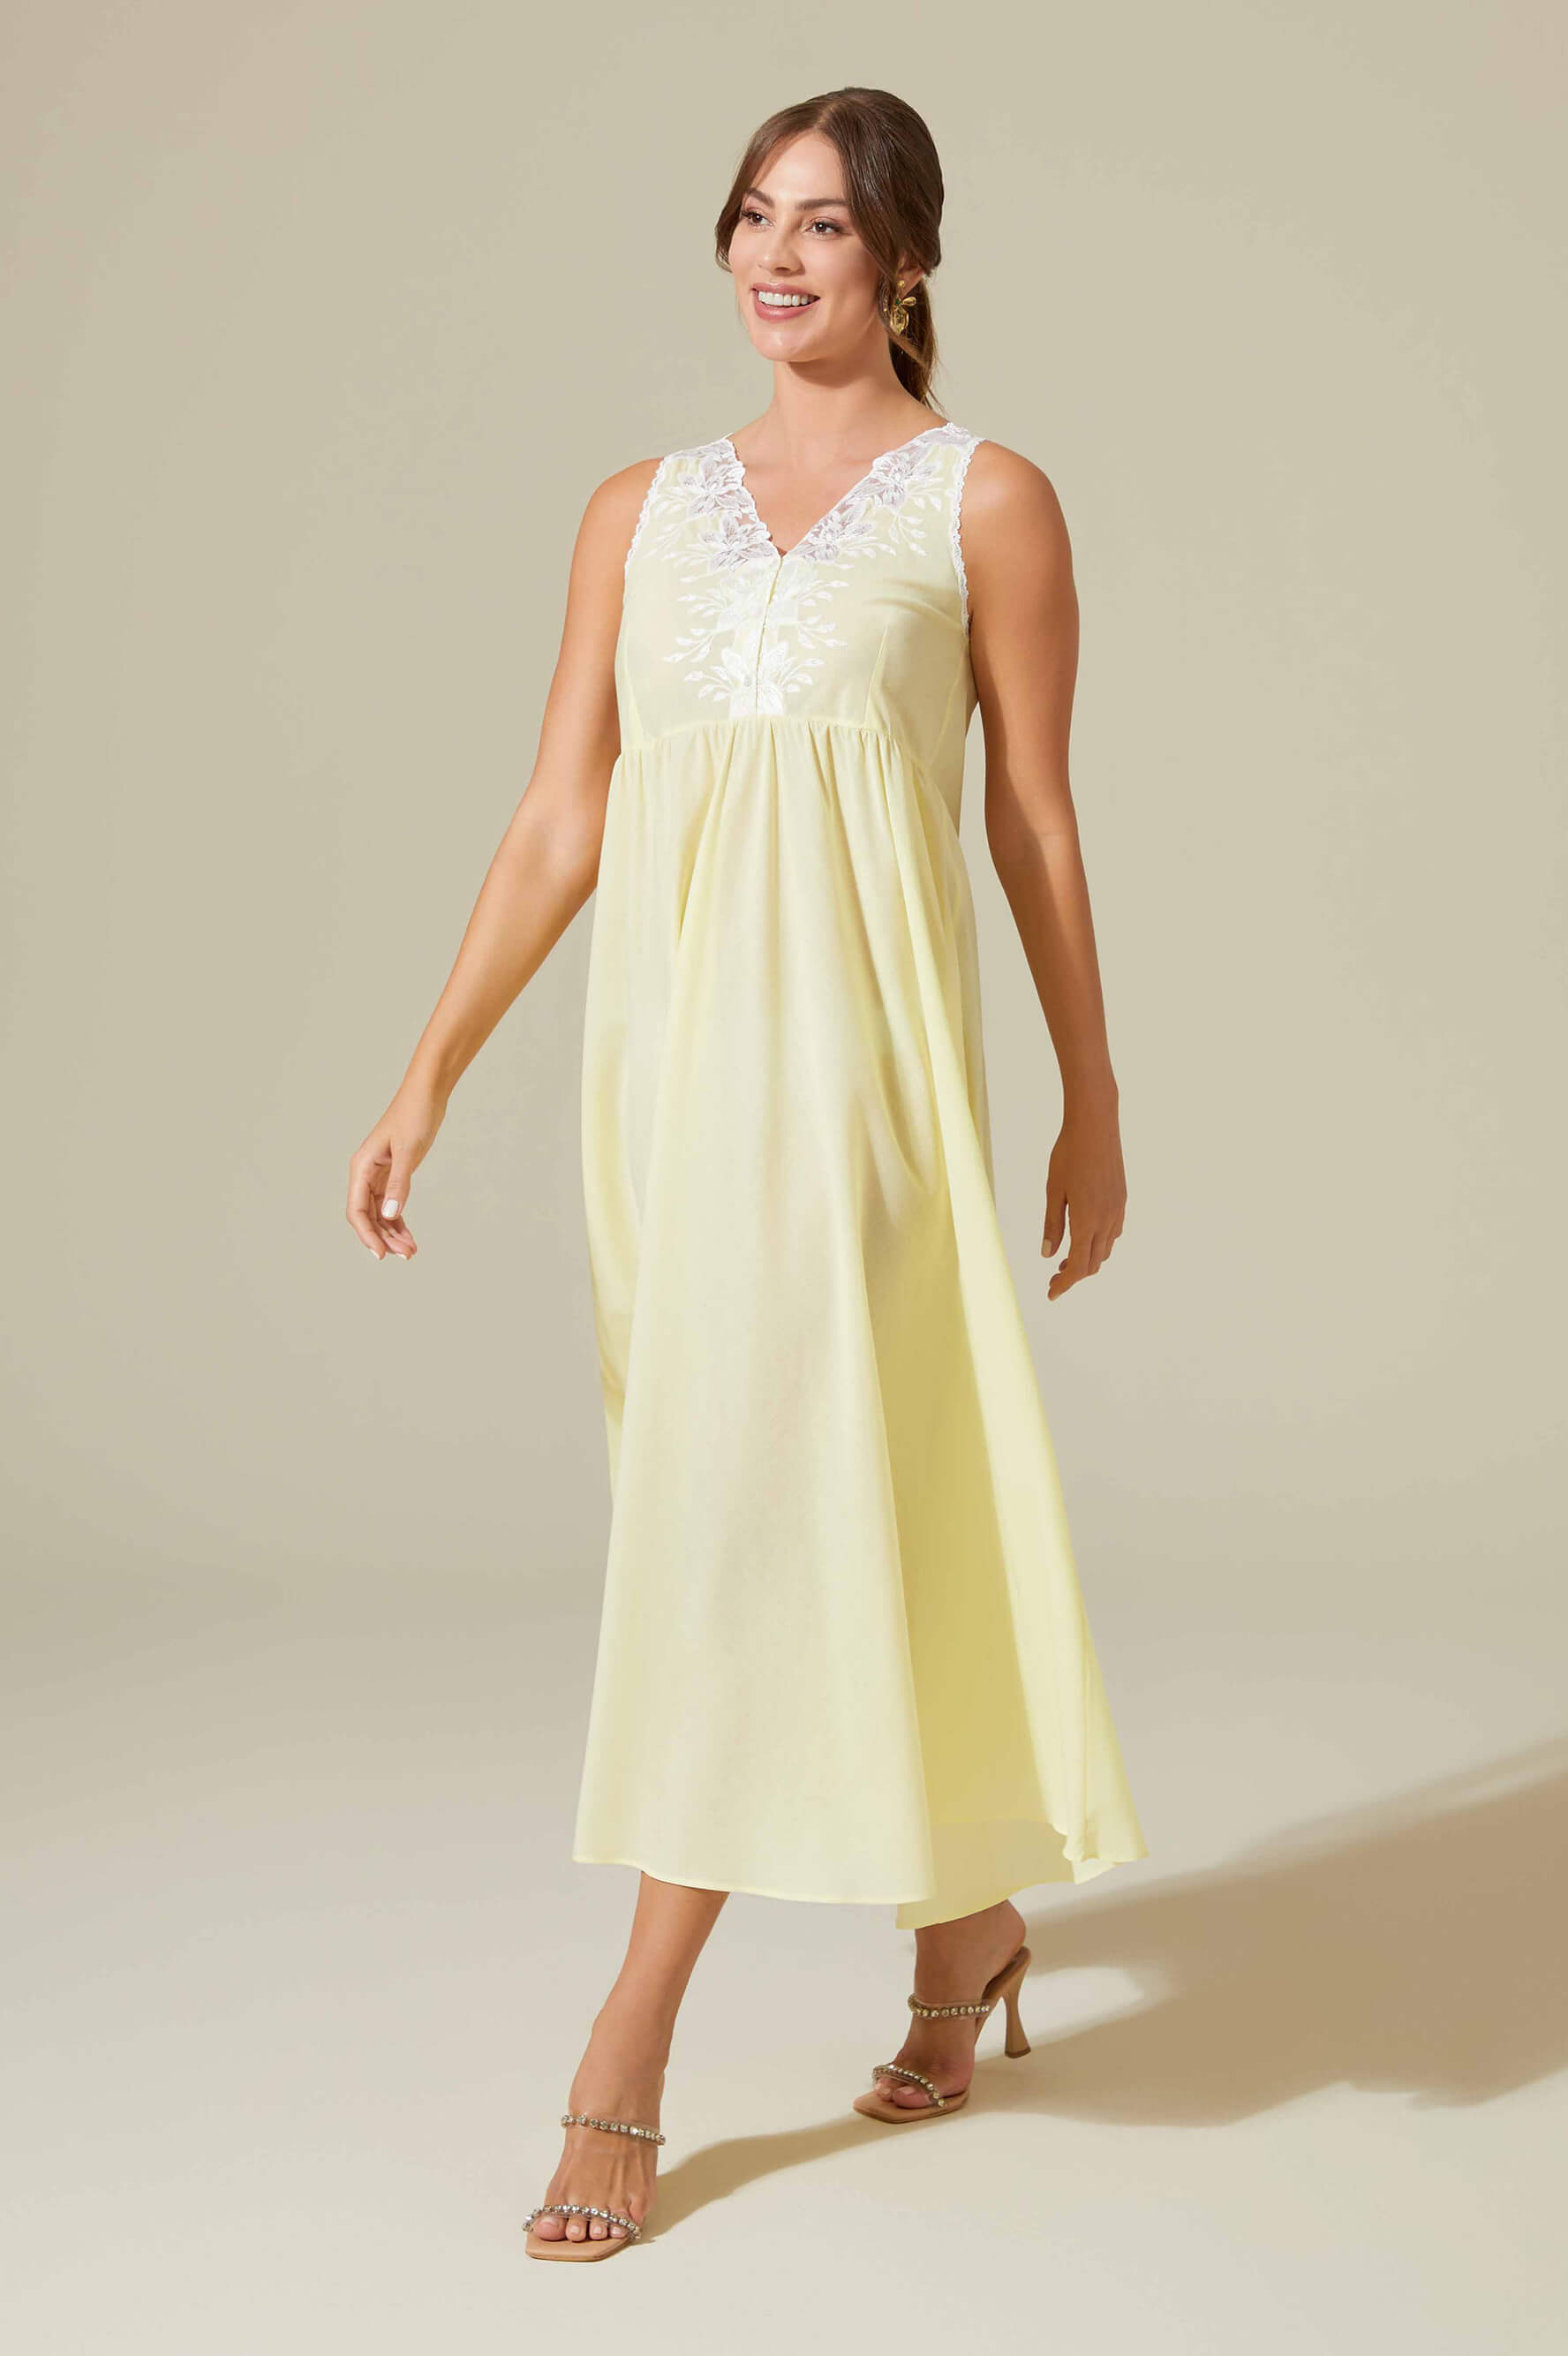 Maia - Trimmed Cotton Voile Long Sleeve Robe Set - Light Yellow